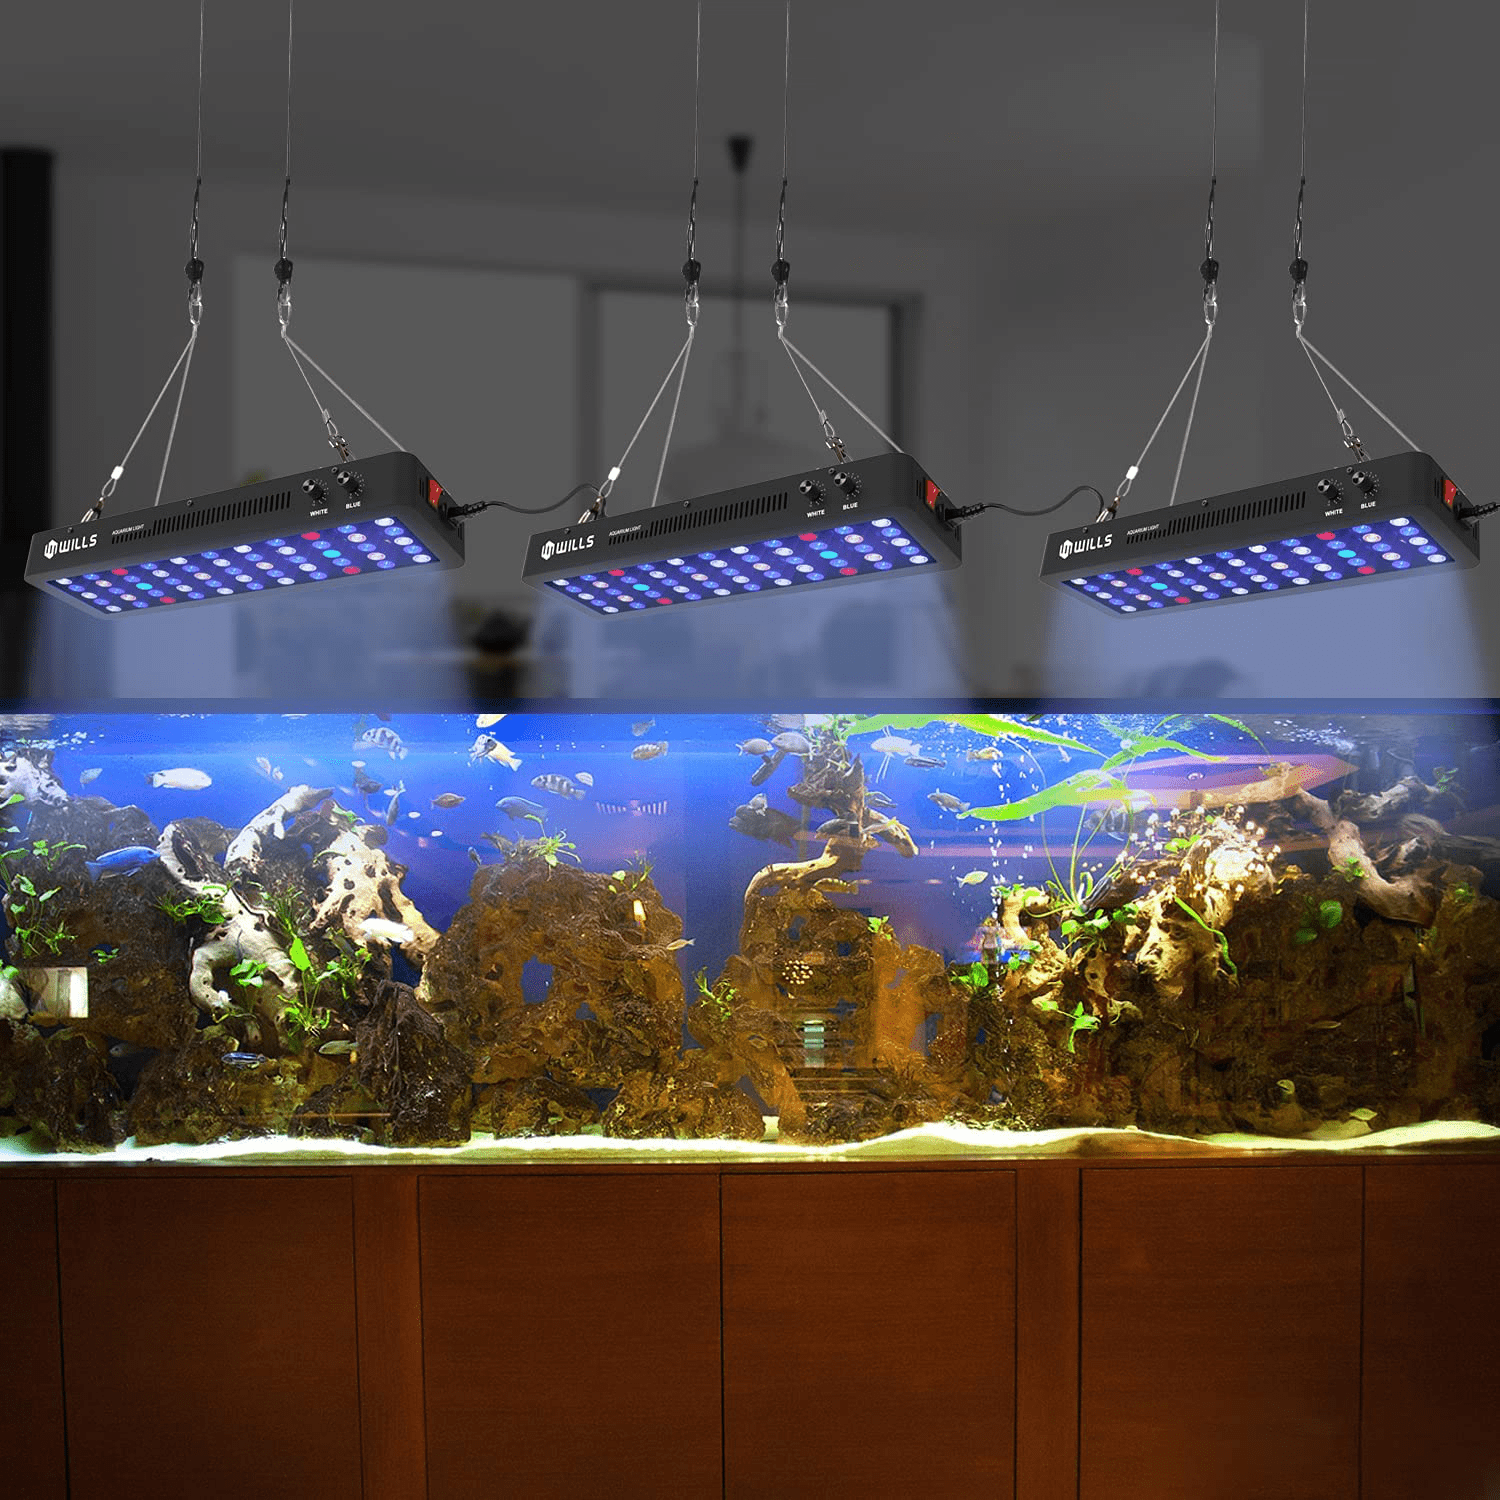 165W Aquarium Lights, WILLS Dimmable Full Spectrum Planted Aquarium Led Lights for Freshwater and Saltwater Coral Reef Fish Tank